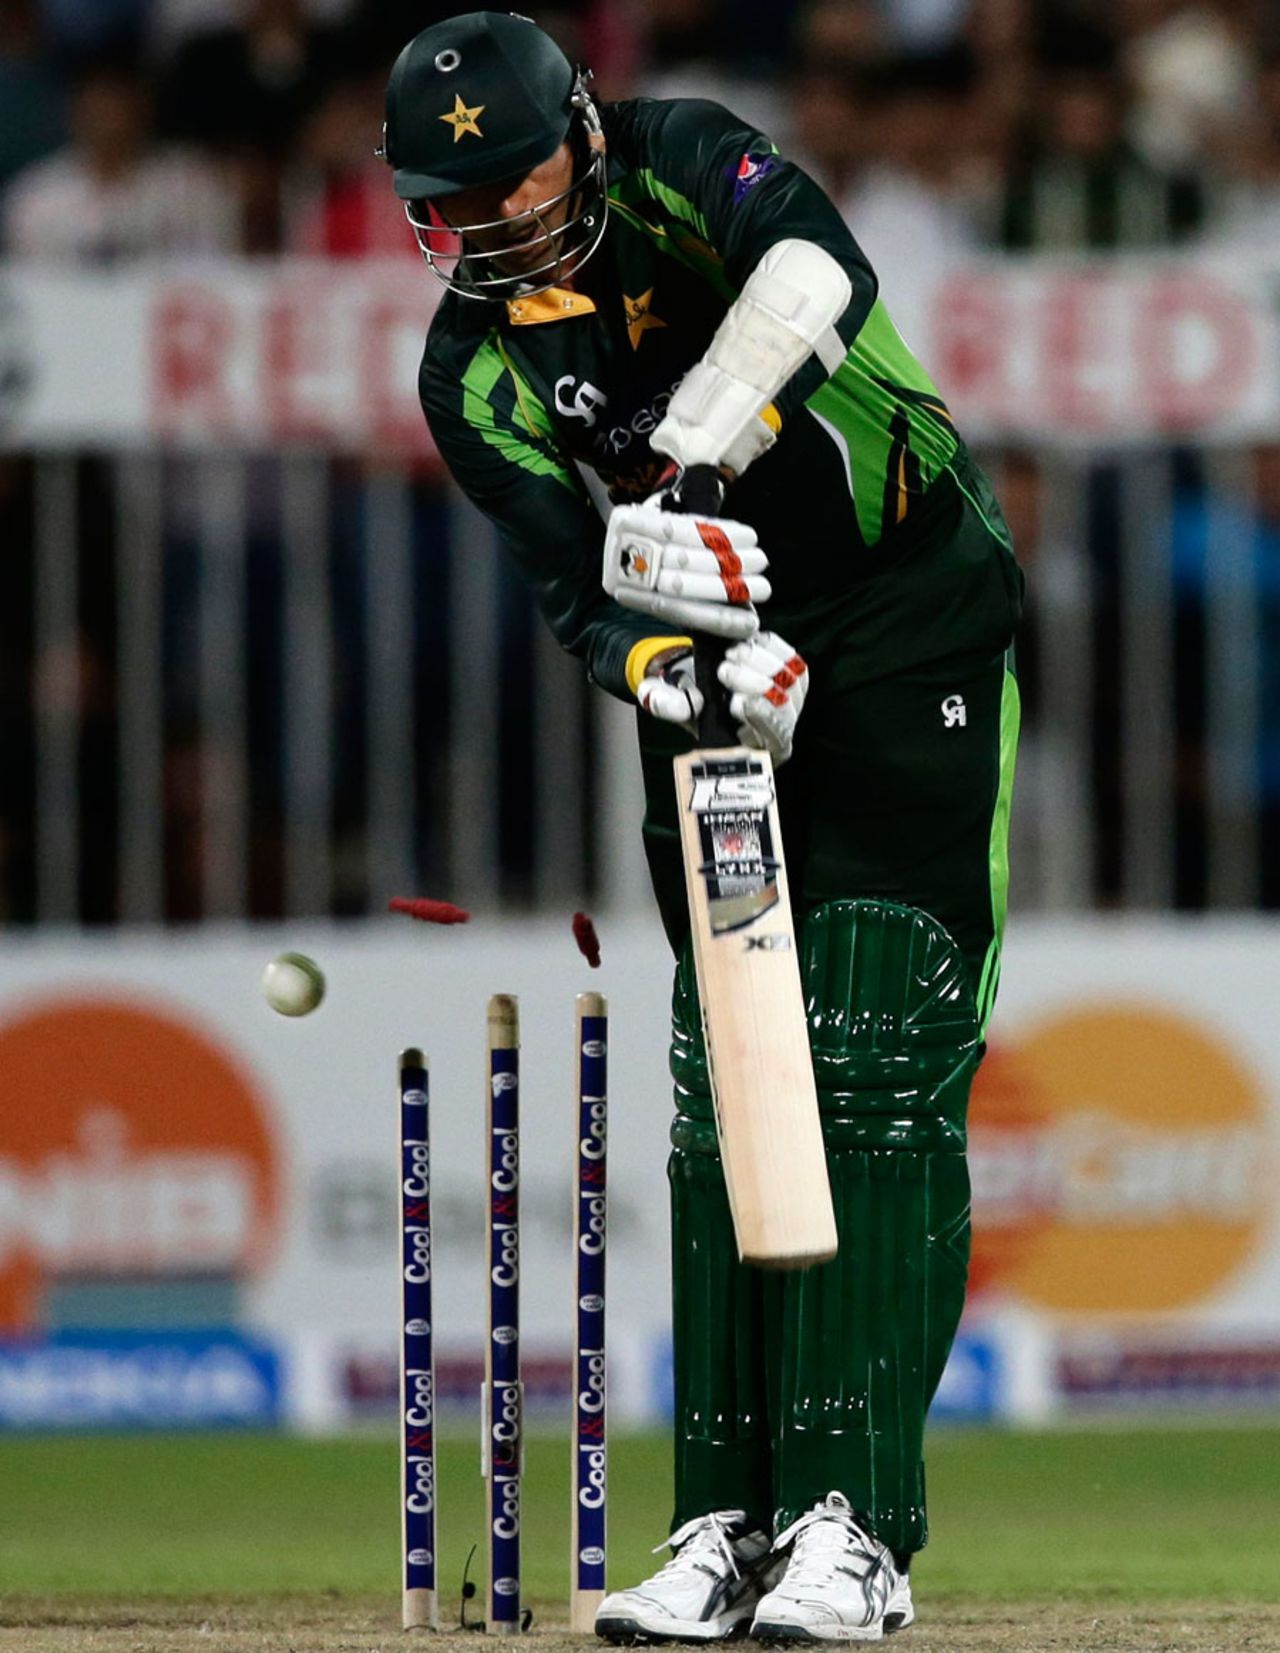 Mohammad Irfan was the last wicket to fall, Pakistan v South Africa, 1st ODI, Sharjah, October 30, 2013